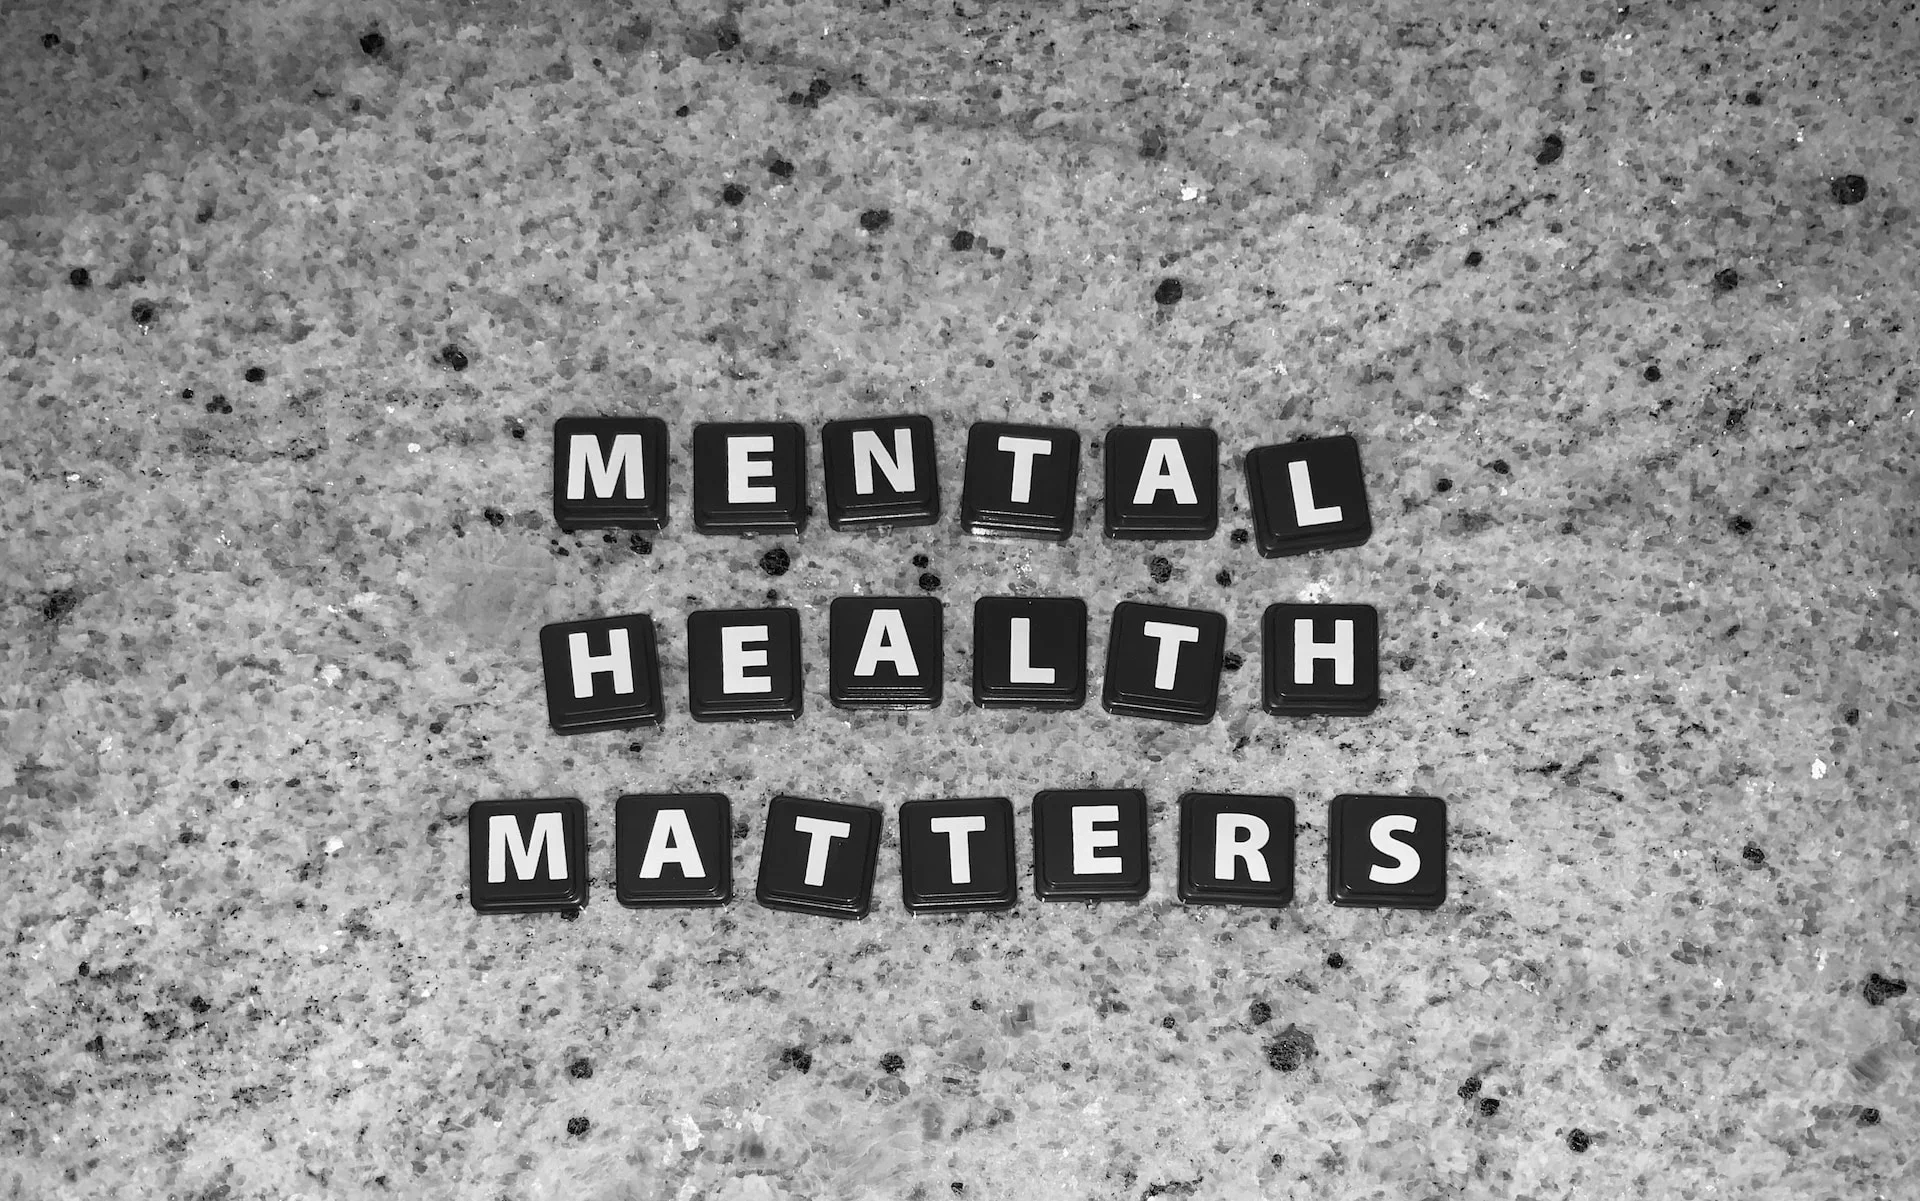 Mental Health Grey Image, Mental Health Photo, Mhm Images, Mh Matters Rock Text, Soil Nature Outdoors Sand Free stock photo